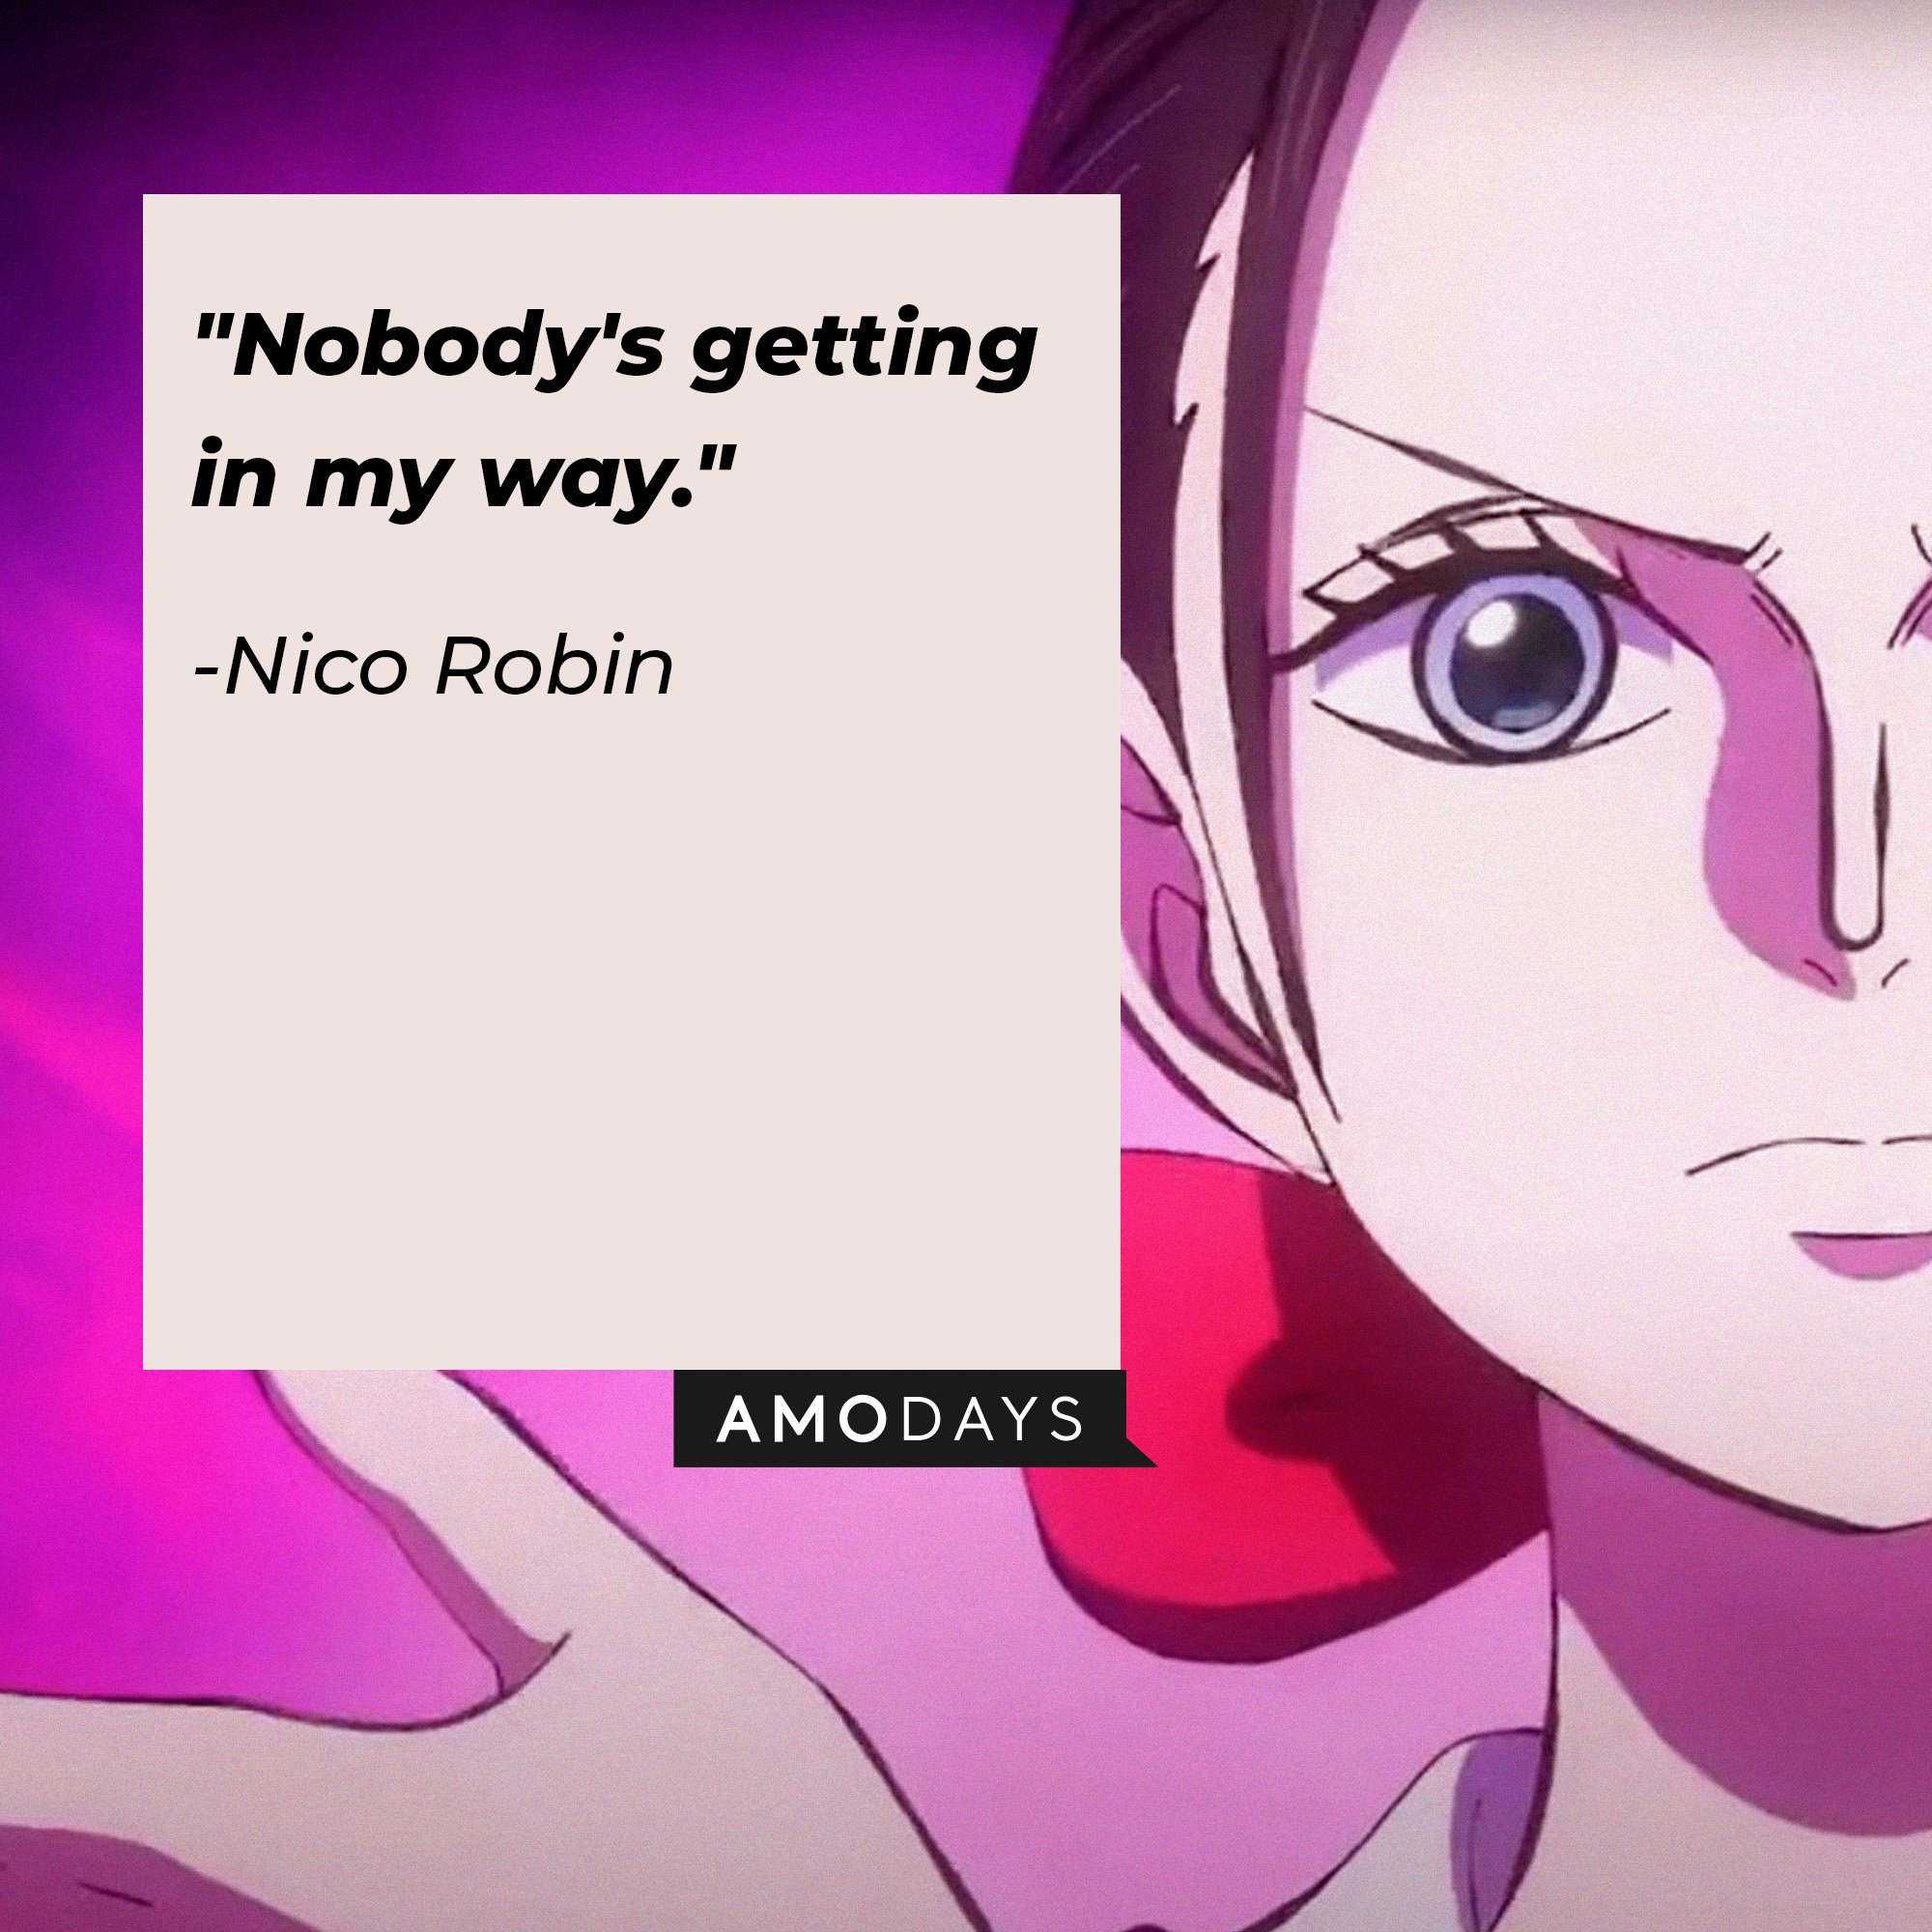 Nico Robin's quote: "Nobody's getting in my way." | Image: AmoDays